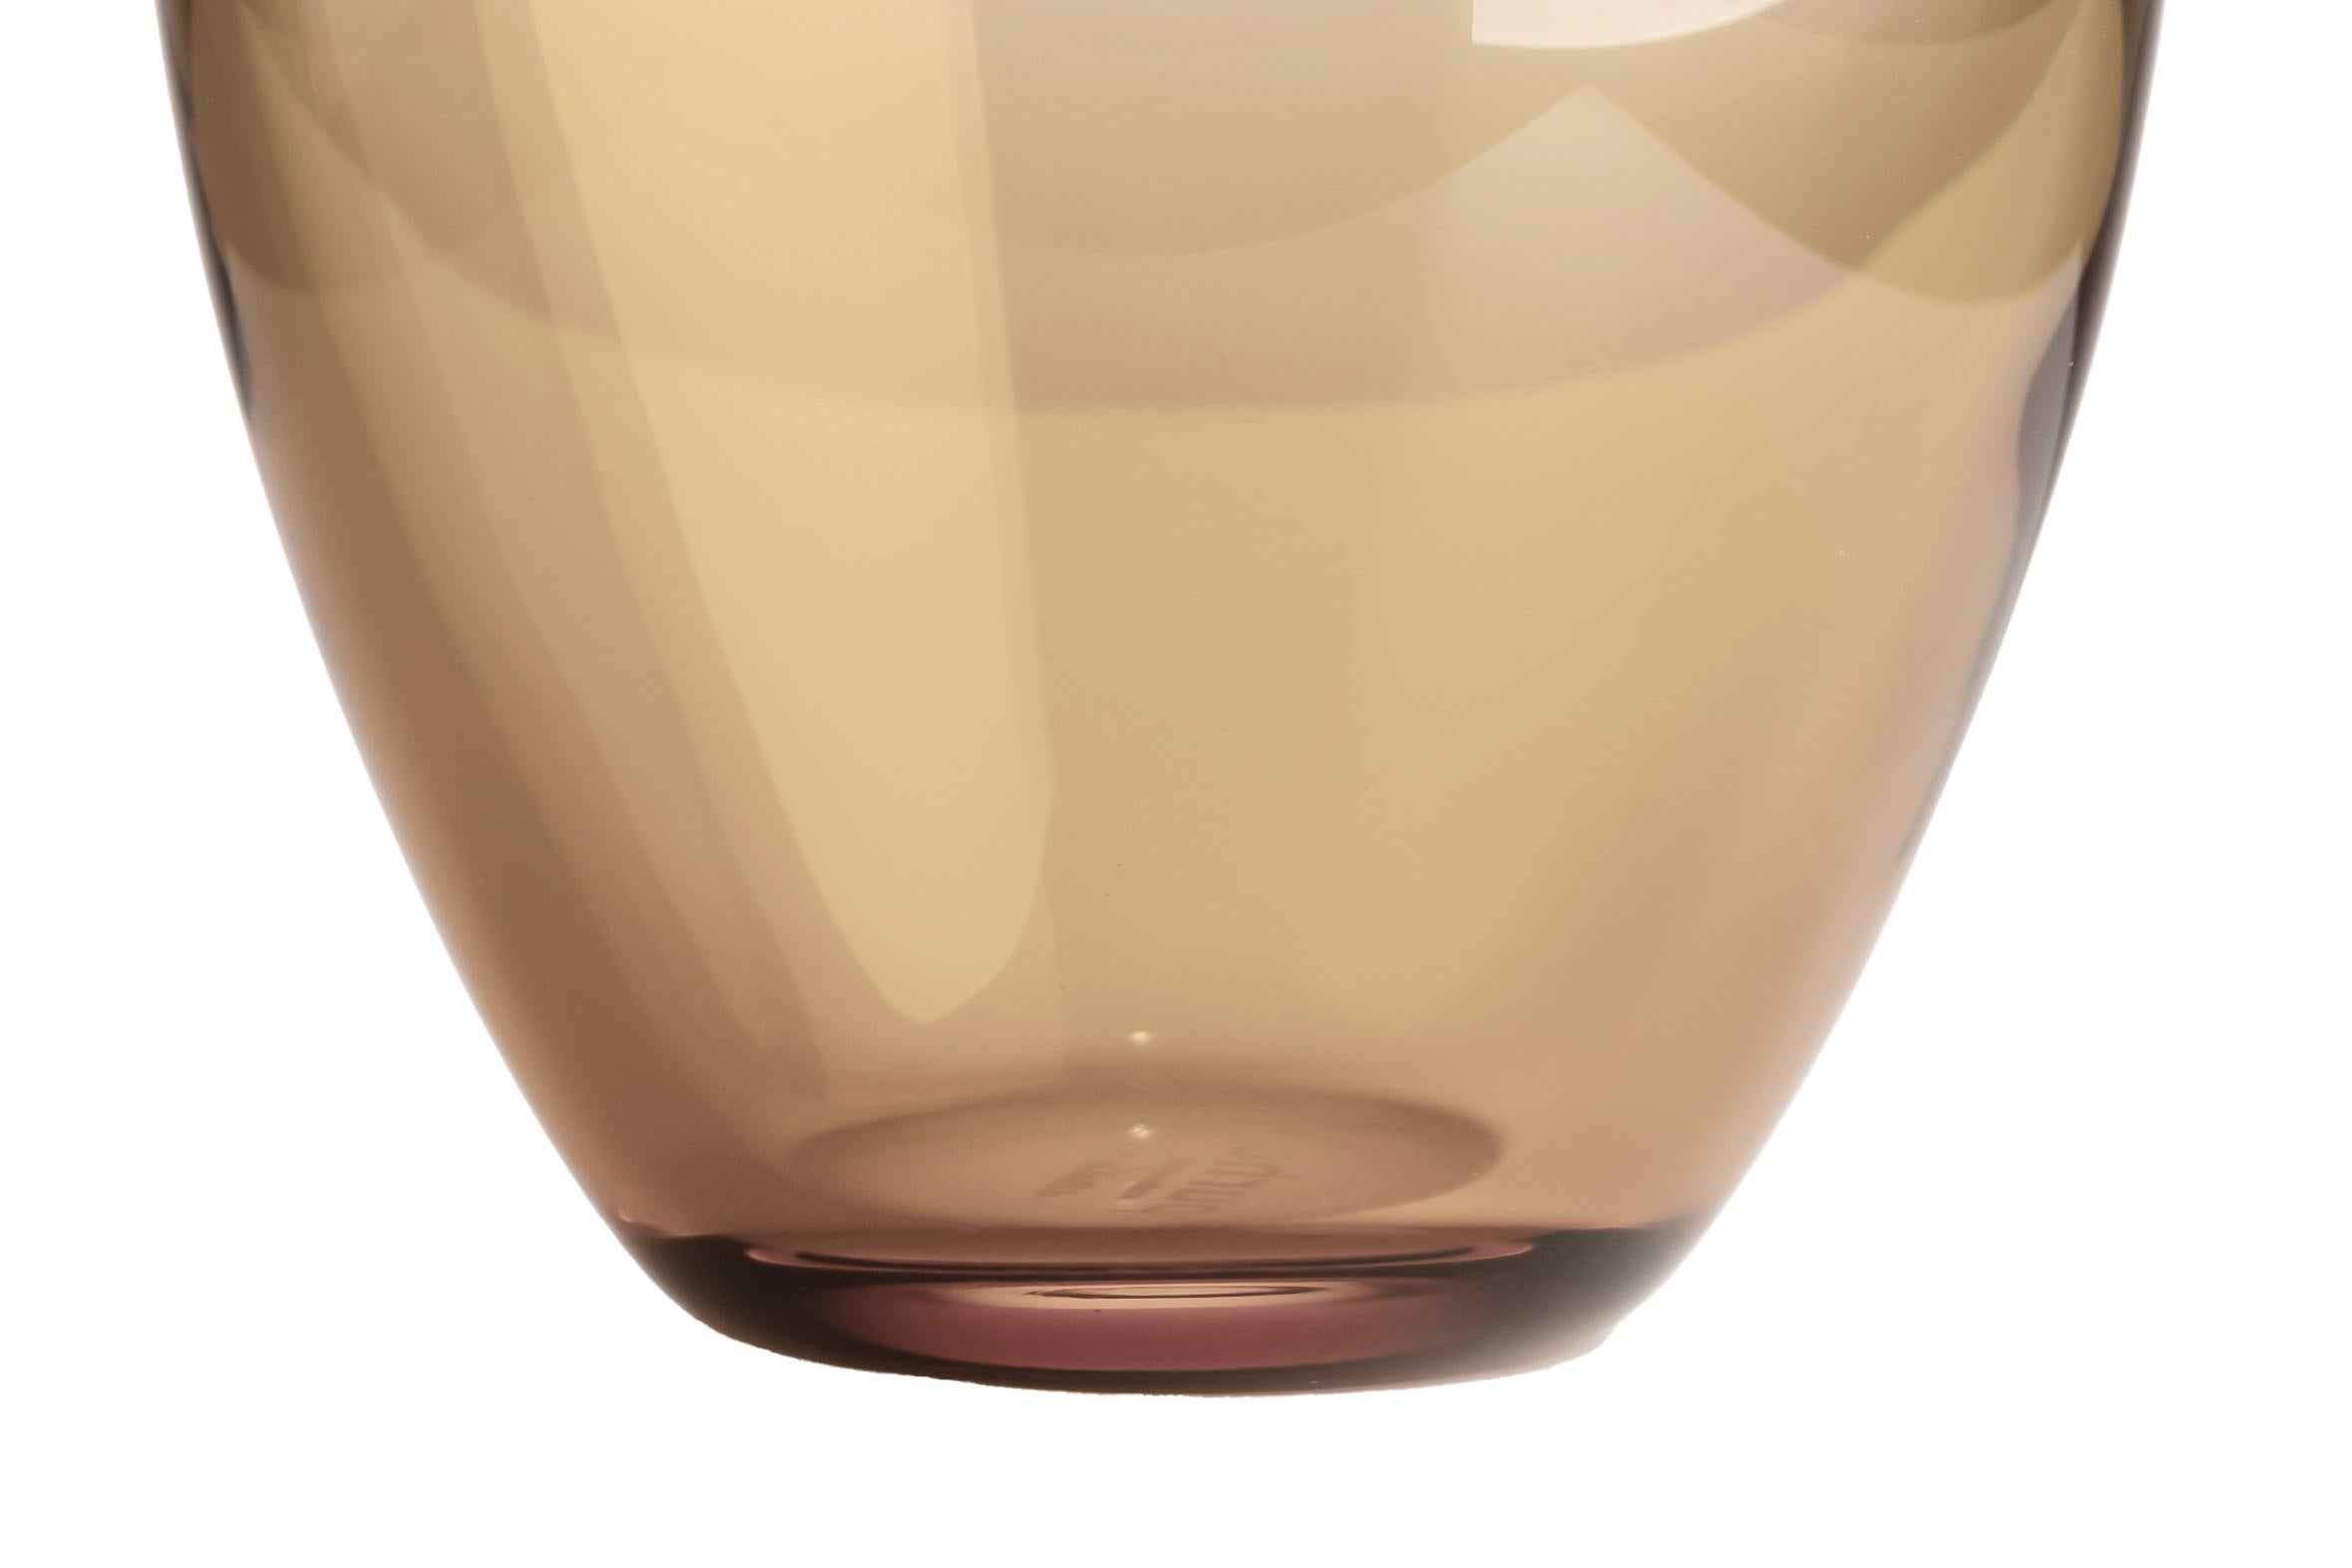 21st century Karim Rashid Queen vase Murano glass various Amber base blue top
Queen designed by Karim Rashid is a curvaceous vase that combine regality with visual wit. Proposed in combination with King, the top of Queen resembles a rounded “halo”,